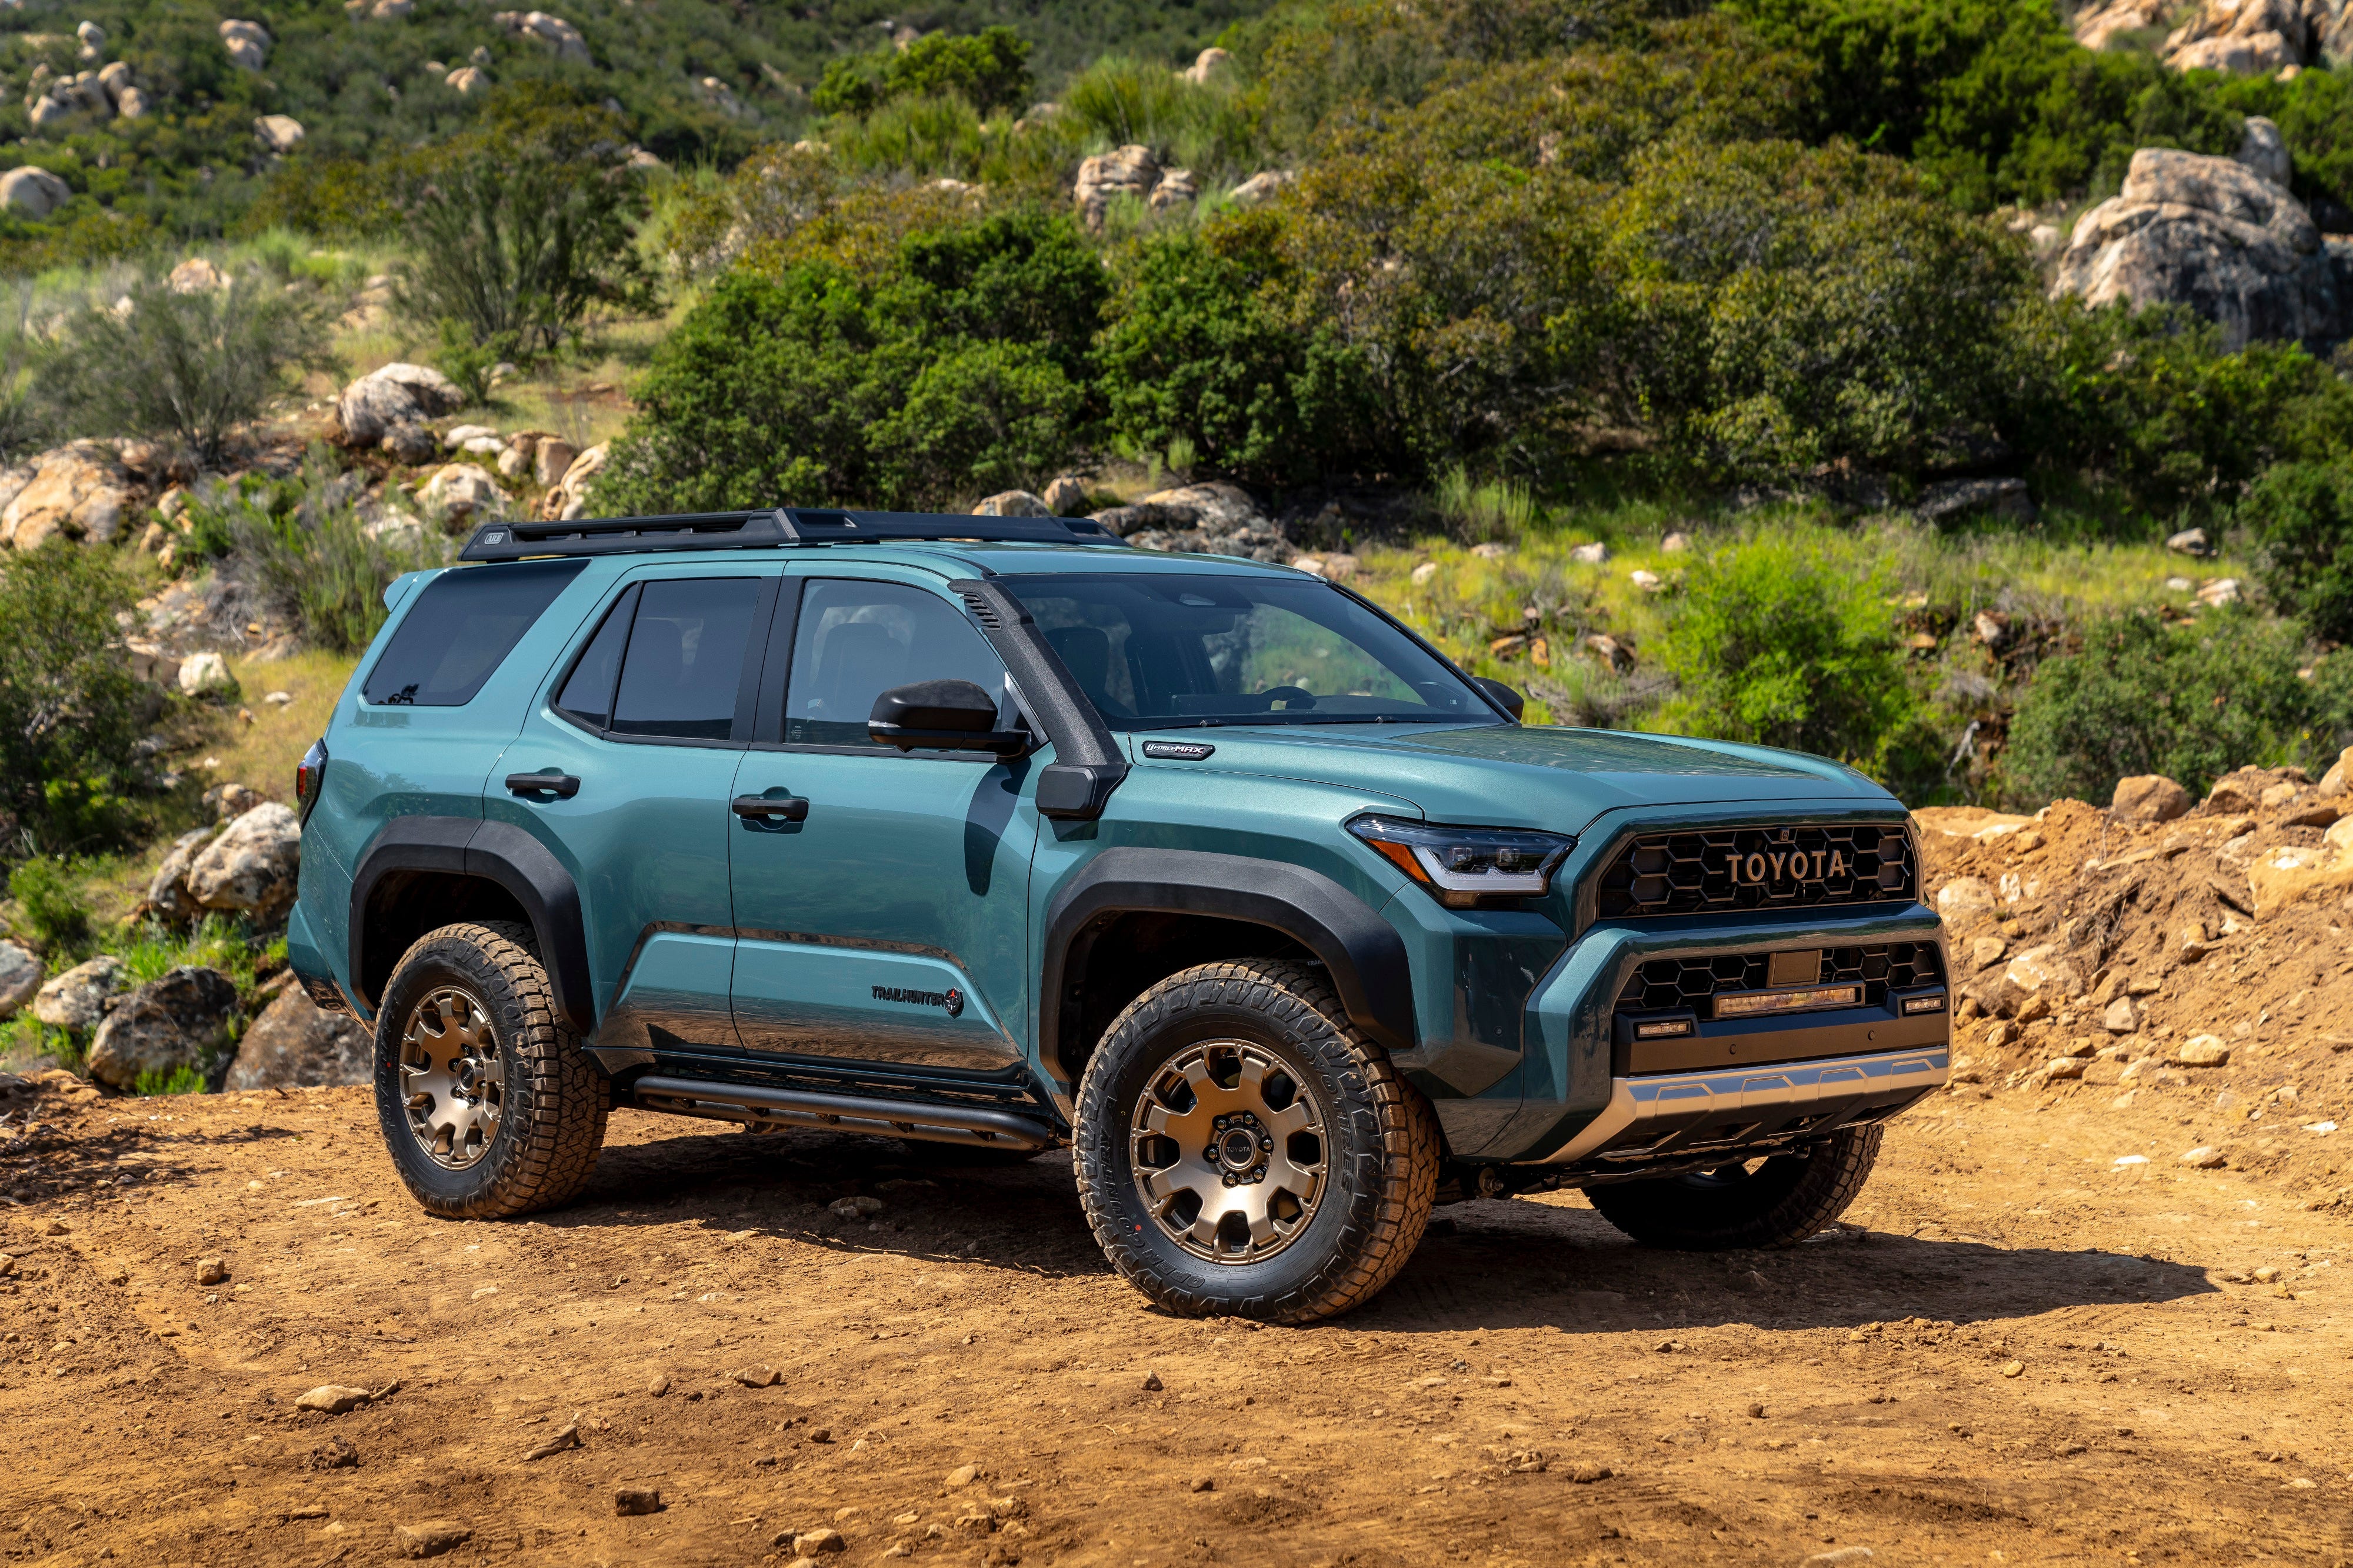 <ul class="summary-list"><li>The new 2025 Toyota 4Runner includes several new features, including a new hybrid option.</li><li>The vehicle still draws on many elements from earlier generations of the classic SUV design.</li><li>Toyota's latest offroader is just one of the company's <a href="https://www.businessinsider.com/toyota-hybrid-cars-ev-sales-growth-prius-bz4x-2024-2">various hybrid offerings</a>.</li></ul><p>Toyota recently unveiled its 2025 4Runner, the newest reimagining of its classic SUV design — and, for the first time, there's a hybrid option included.</p><p>The newest models have powertrains of up to 326 horsepower, as well as new safety features like off-road cruise control and articulation settings.</p><p>The 4Runner isn't the first Toyota off-roader to get the hybrid treatment; the company already offers hybrid variants of its Land Cruiser and Tacoma pickup truck, <a href="https://www.businessinsider.com/toyota-hybrid-cars-ev-sales-growth-prius-bz4x-2024-2">among several other models</a>.</p><p>But it comes as some automakers turn their ambitions away from fully electric vehicles and <a href="https://www.businessinsider.com/hybrids-more-popular-than-evs-toyota-ford-tesla-cars-electric-2024-3">add more accessible (and widely popular) hybrids</a> to the mix.</p><p>"This sixth-generation model offers a cool new look and incredible features, yet retains the rugged style and capability our customers love about this icon of adventure," said Dave Christ, a vice president and general manager at Toyota North America, in a <a href="https://pressroom.toyota.com/2025-toyota-4runner-refines-adventure-ready-heritage/">statement</a>.</p><p>The exact price range of the new 4Runner is unclear, but the previous model starts at around $41,000.</p><p>Here's what the new 2025 lineup looks like.</p><div class="read-original">Read the original article on <a href="https://www.businessinsider.com/new-toyota-4runner-2025-suv-hybrid-photos-2024-4">Business Insider</a></div>